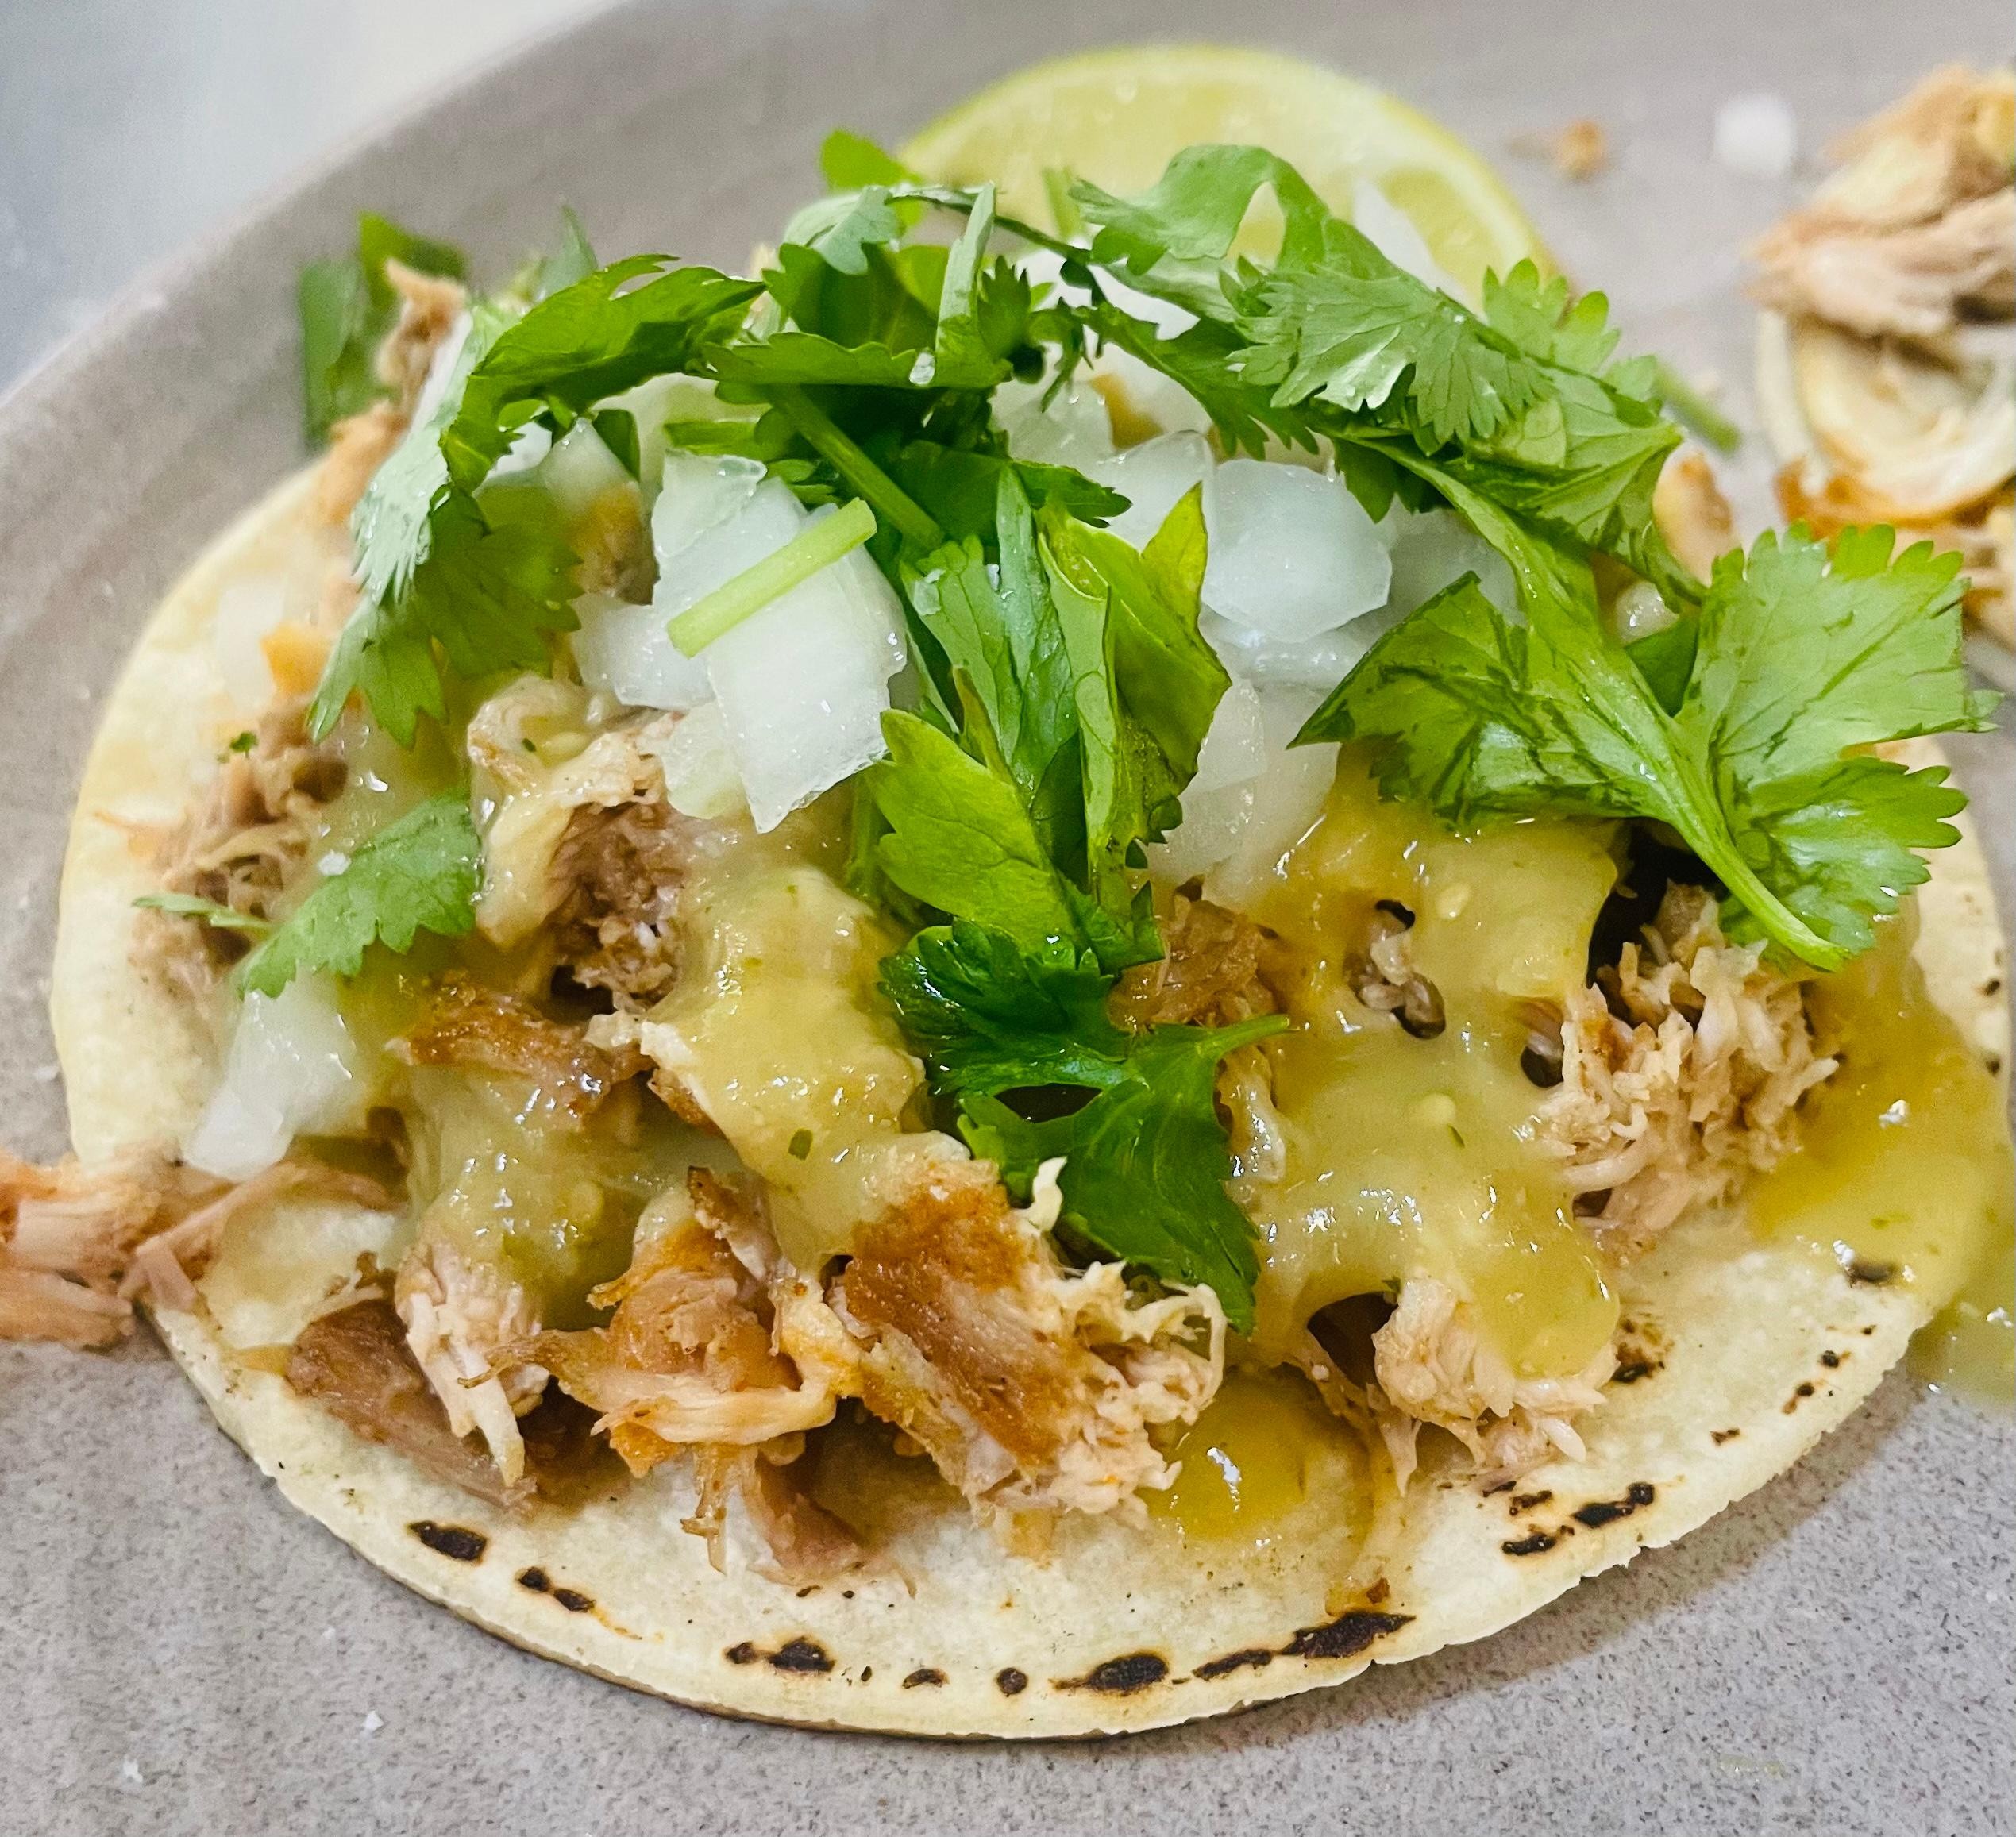  PULLED CHICKEN TACO